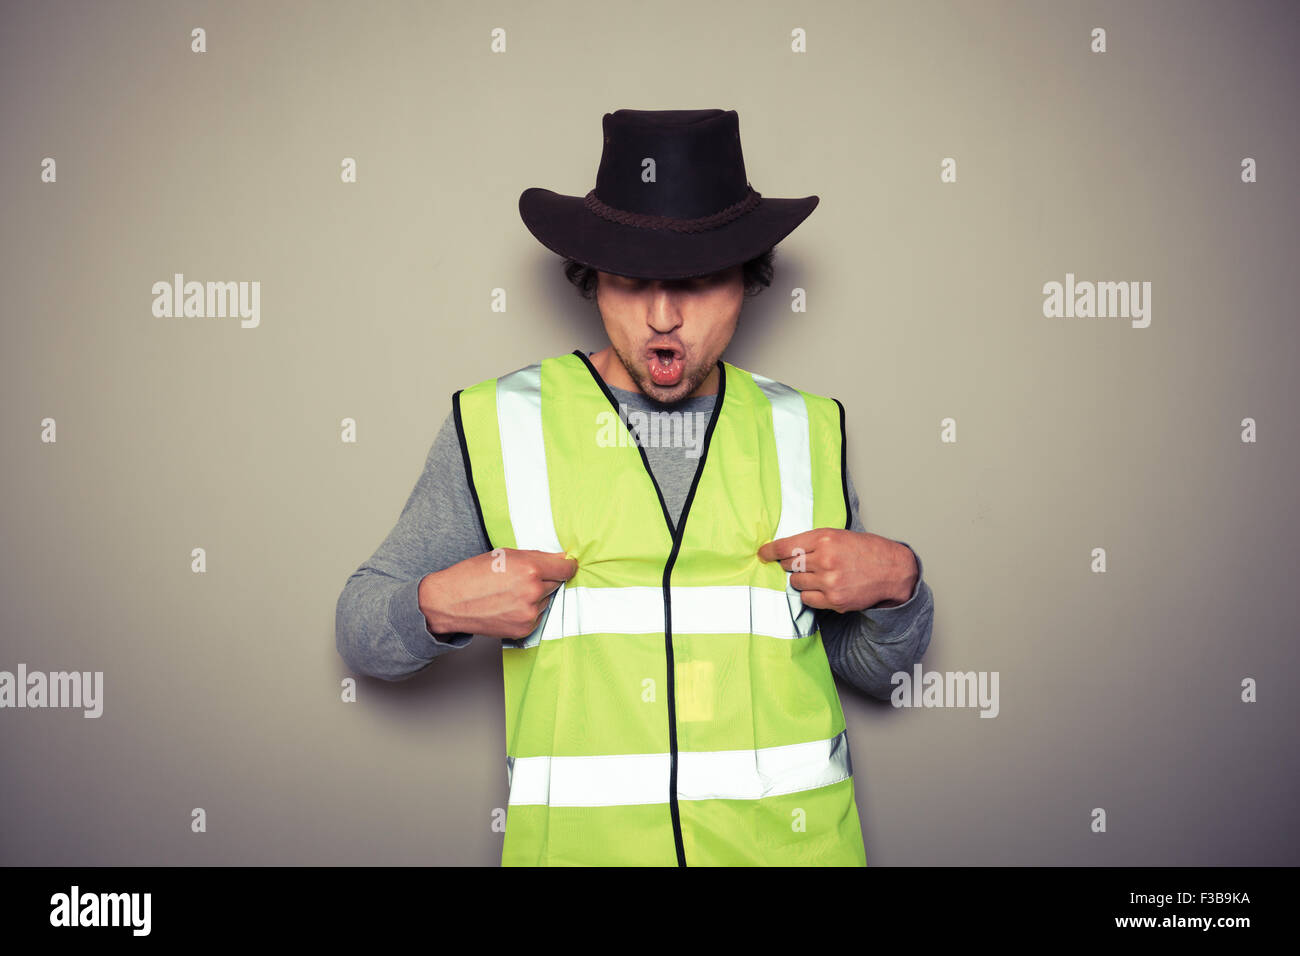 A cheeky cowboy builder is wearing a high visibility vest and twisting his nipples Stock Photo